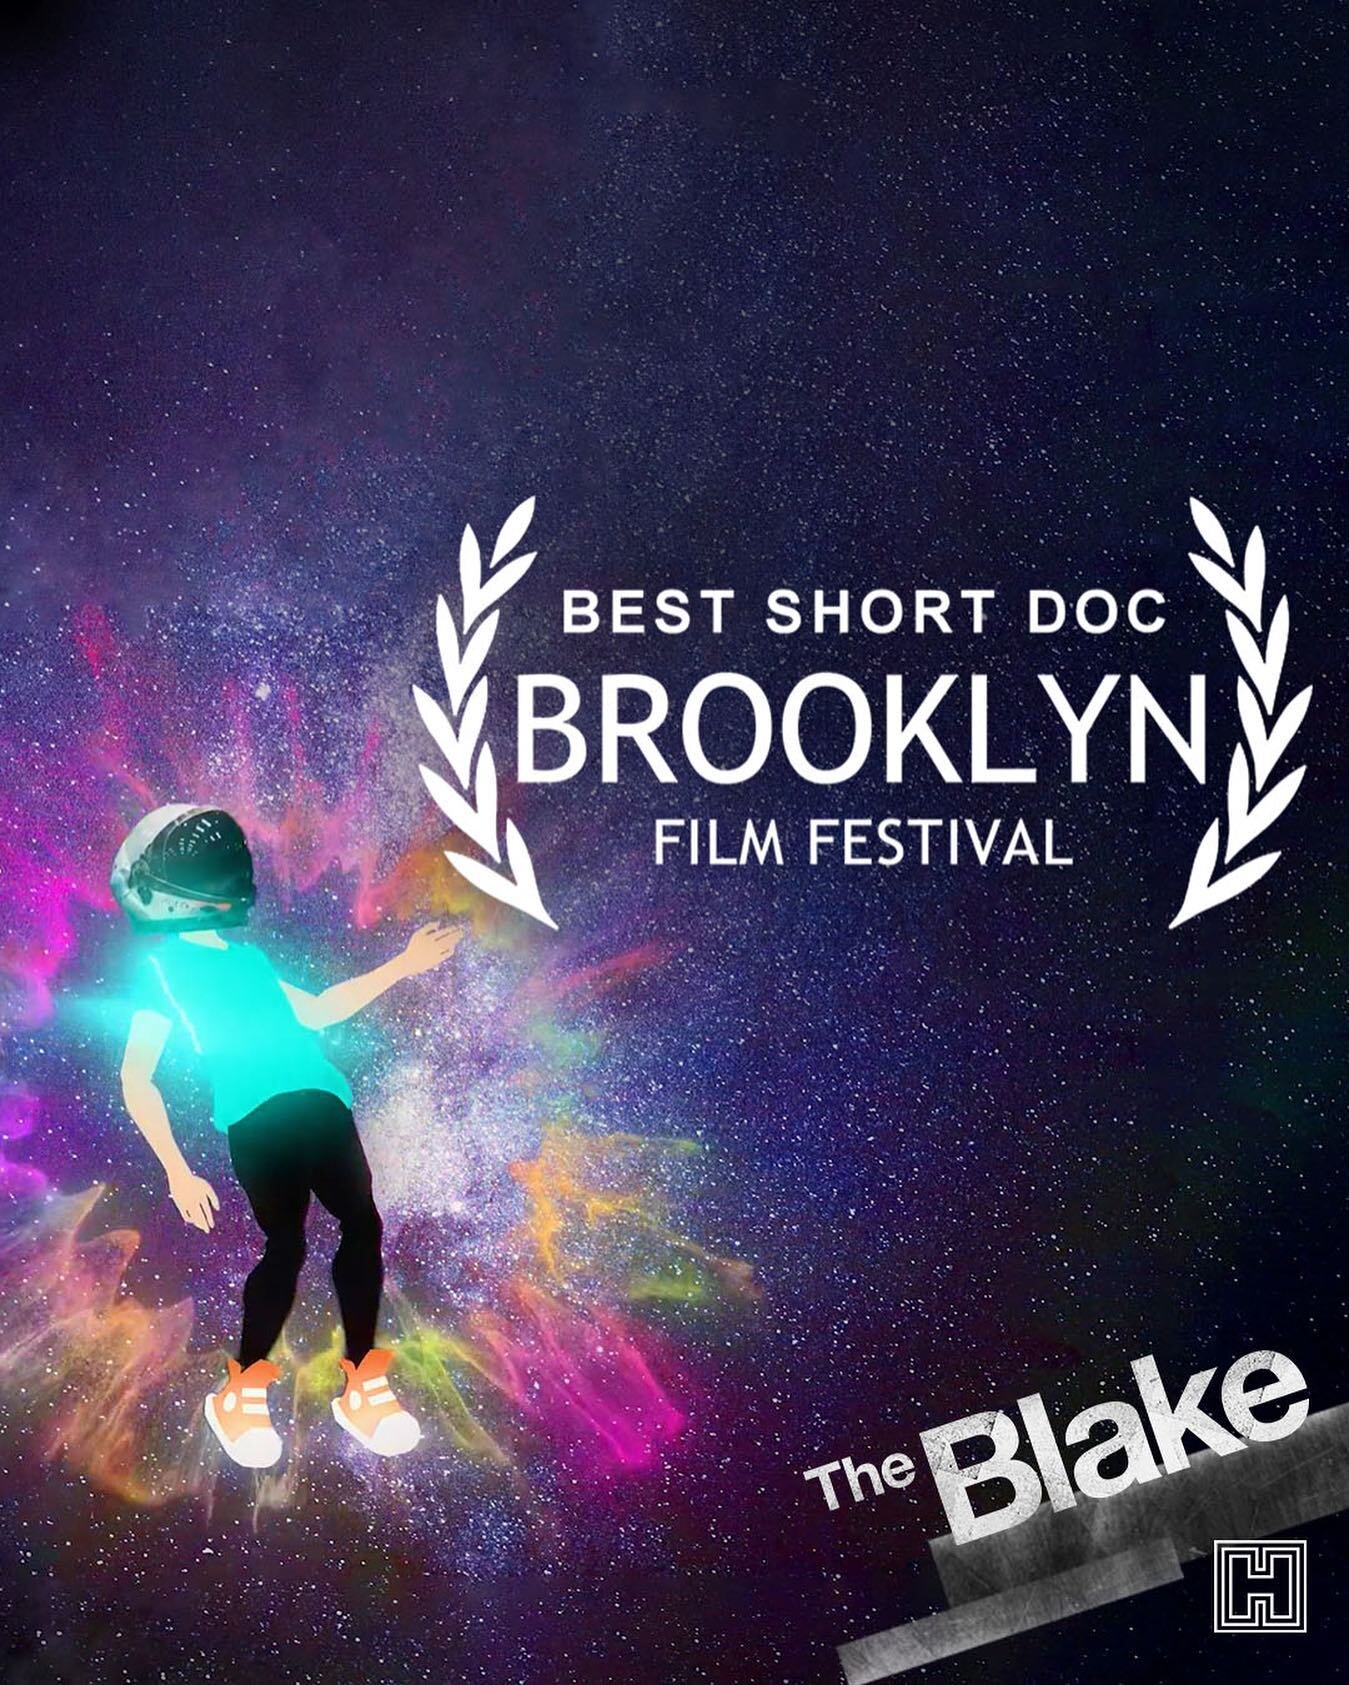 So honored THE BLAKE won BEST DOC SHORT @brooklynfilmfestival. We&rsquo;re so excited &amp; grateful 🥹

#winners #awardwinners #awardwinningfilms #winningfilm #filmaward #filmwins #bestdocshort #bestdocumentaryshort #bestdocumentaryshortfilm #brookl